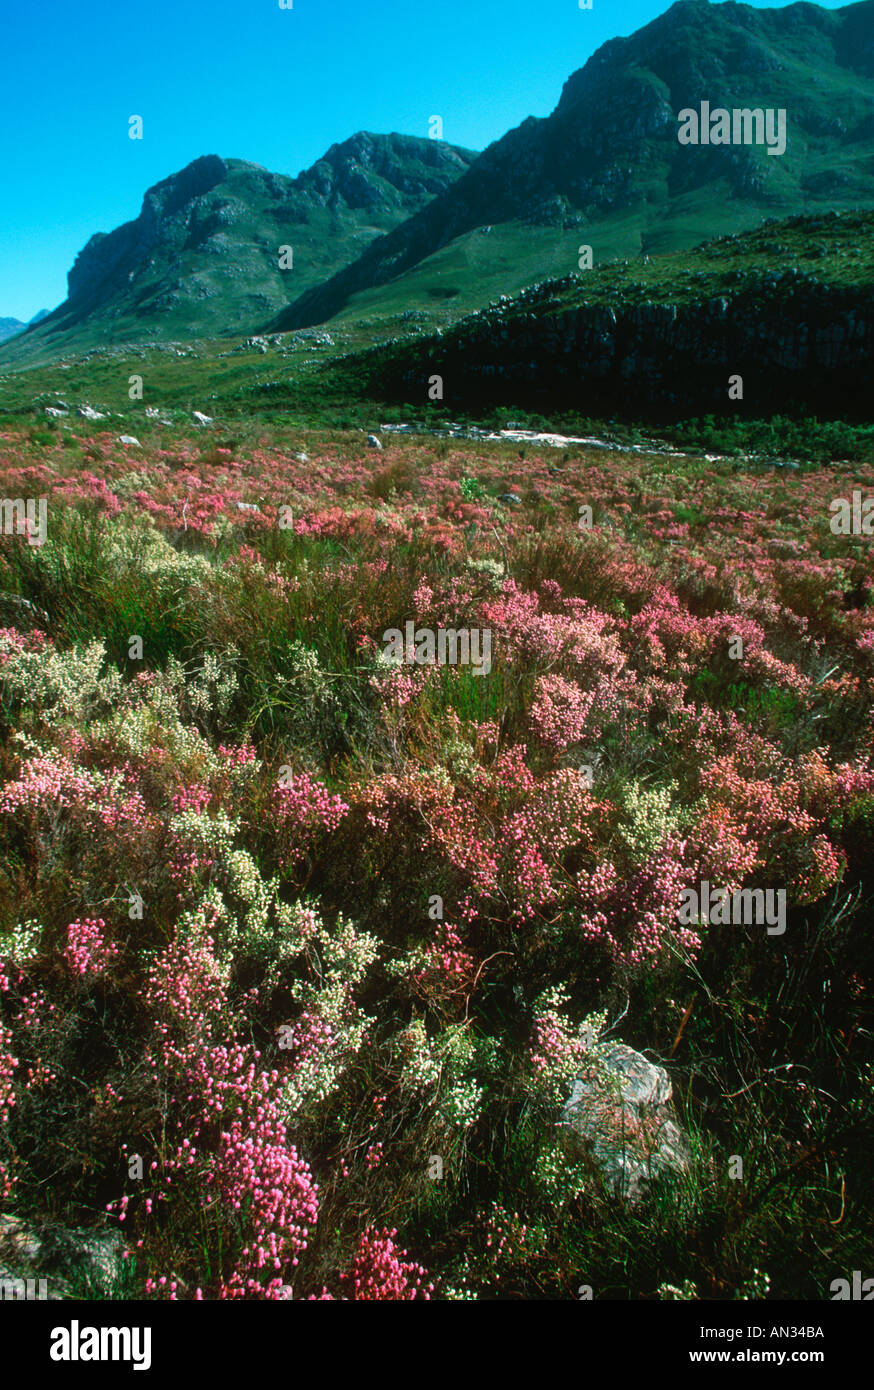 Fynbos Known for its high plant diversity Cape floral kingdom South Africa Stock Photo